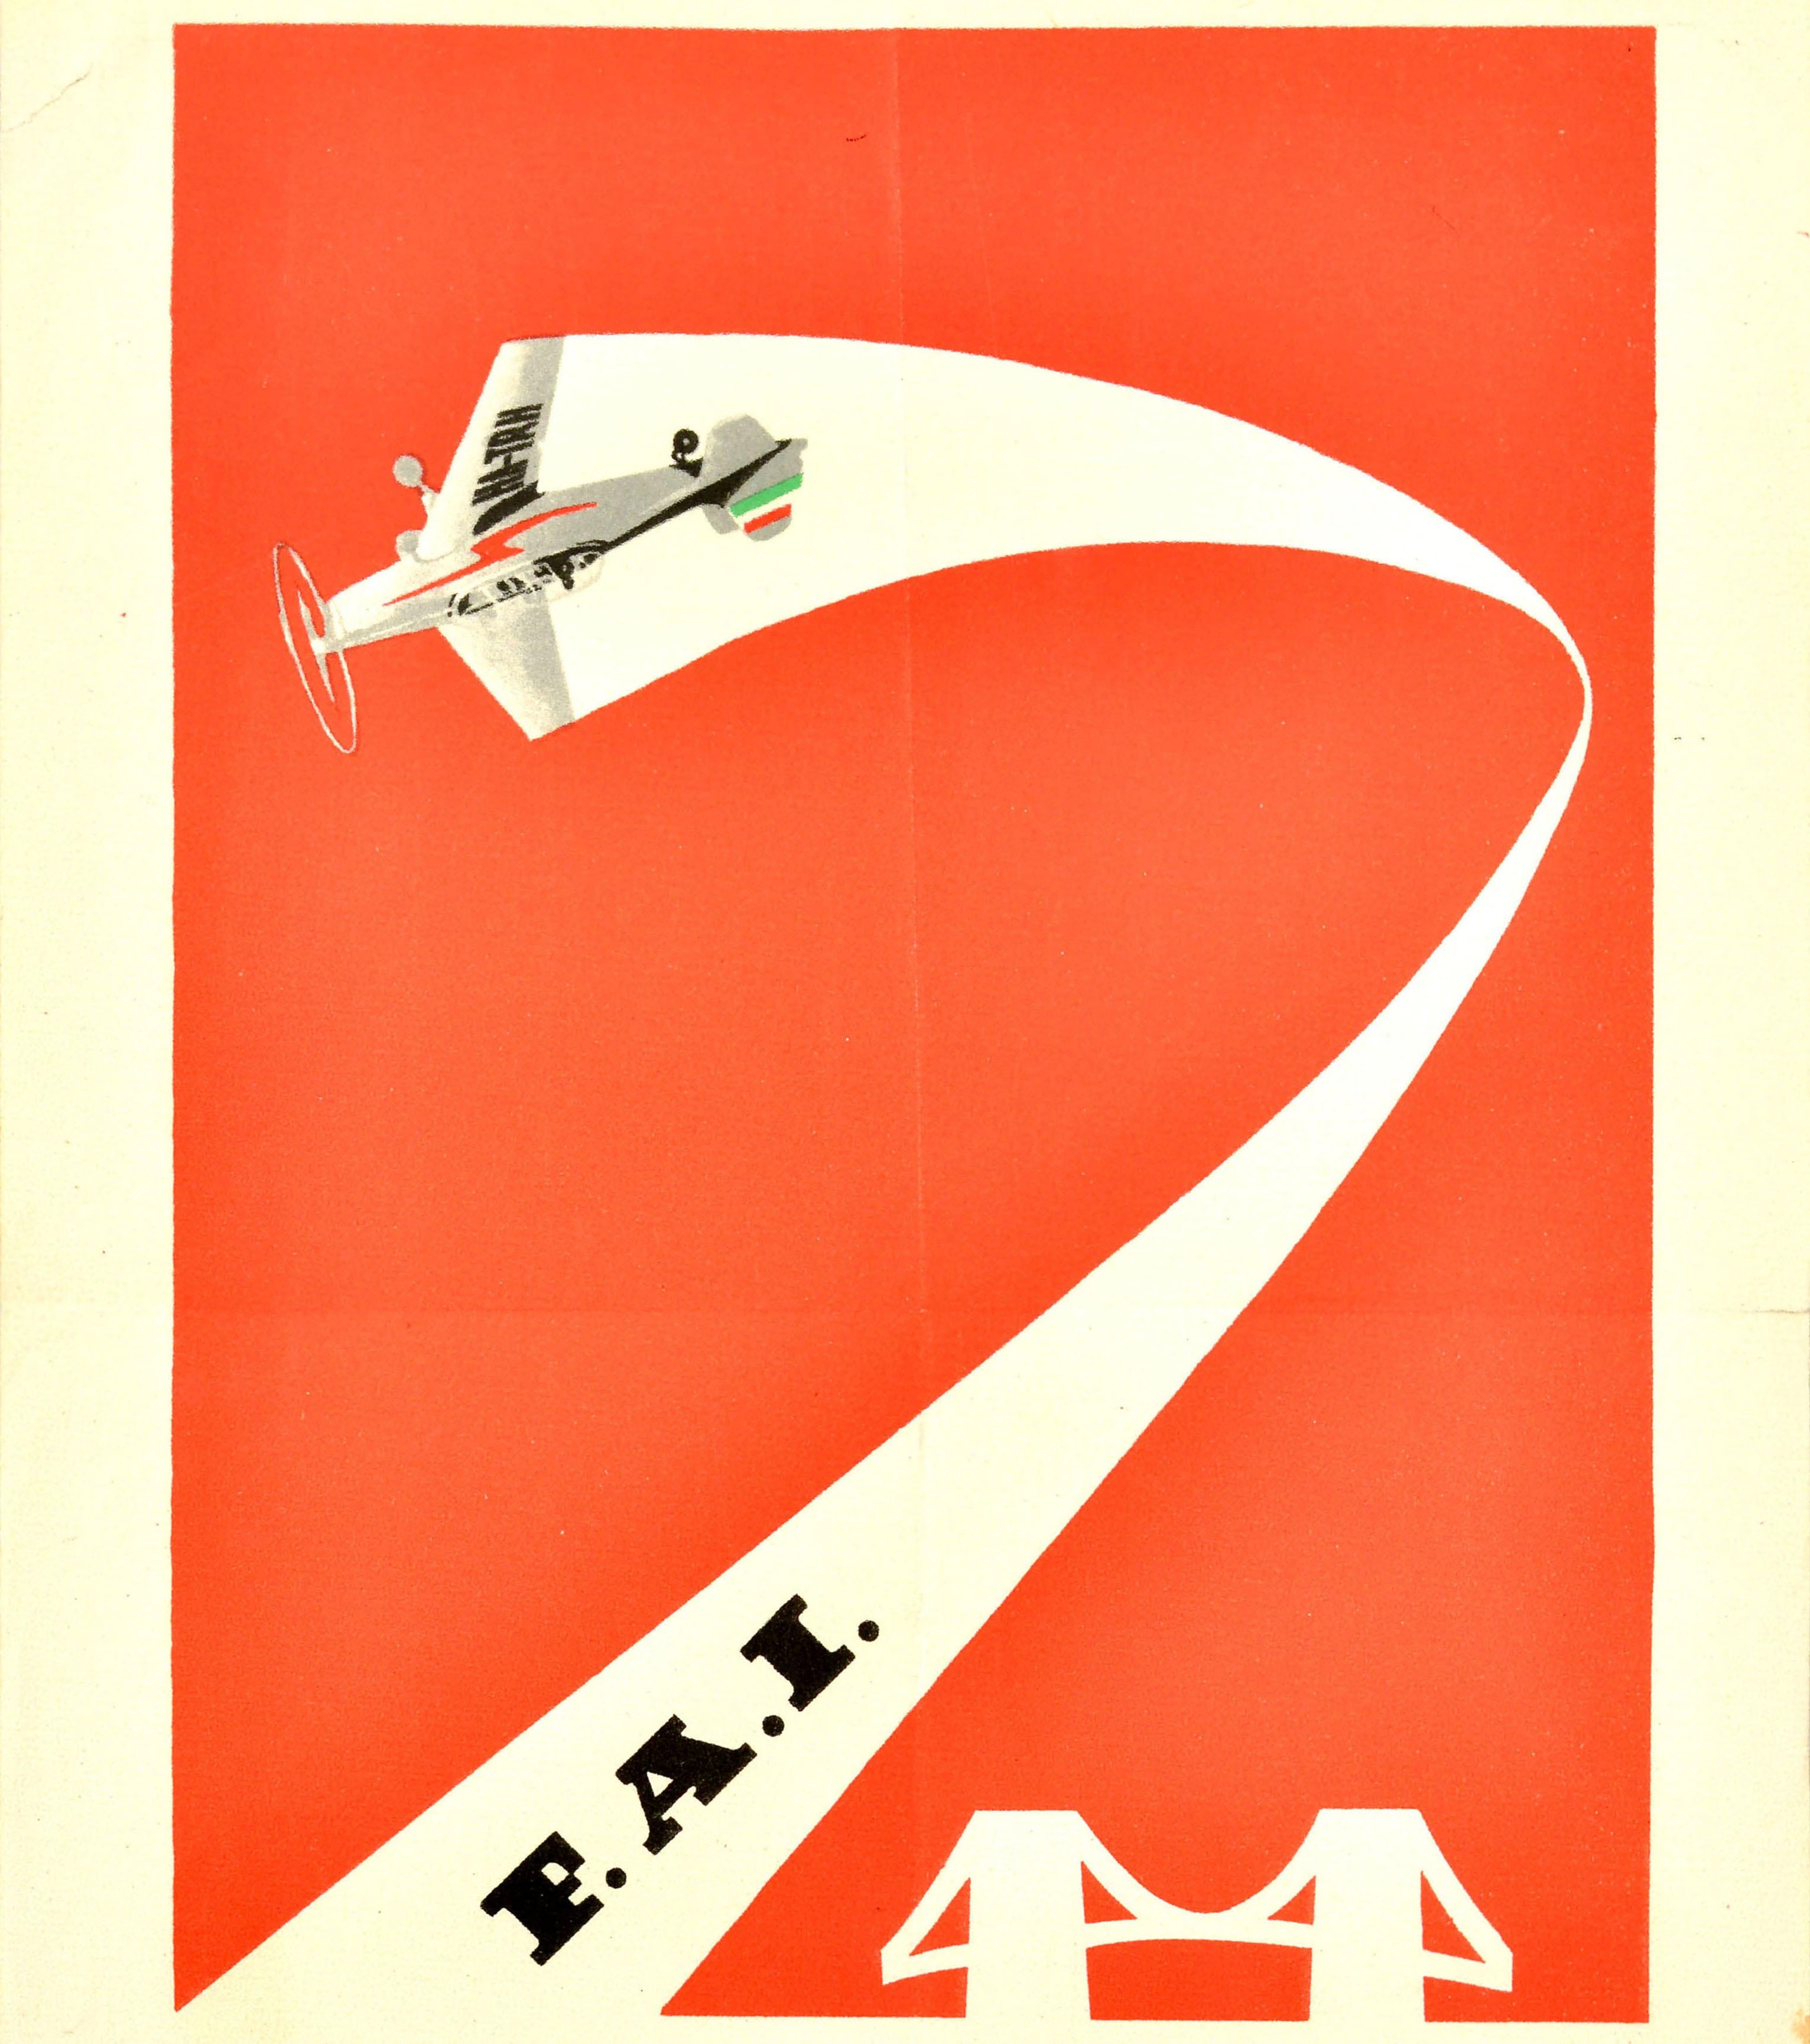 Original Vintage Advertising Poster Kecskemet International Air Show Hungary Art - Red Print by Unknown